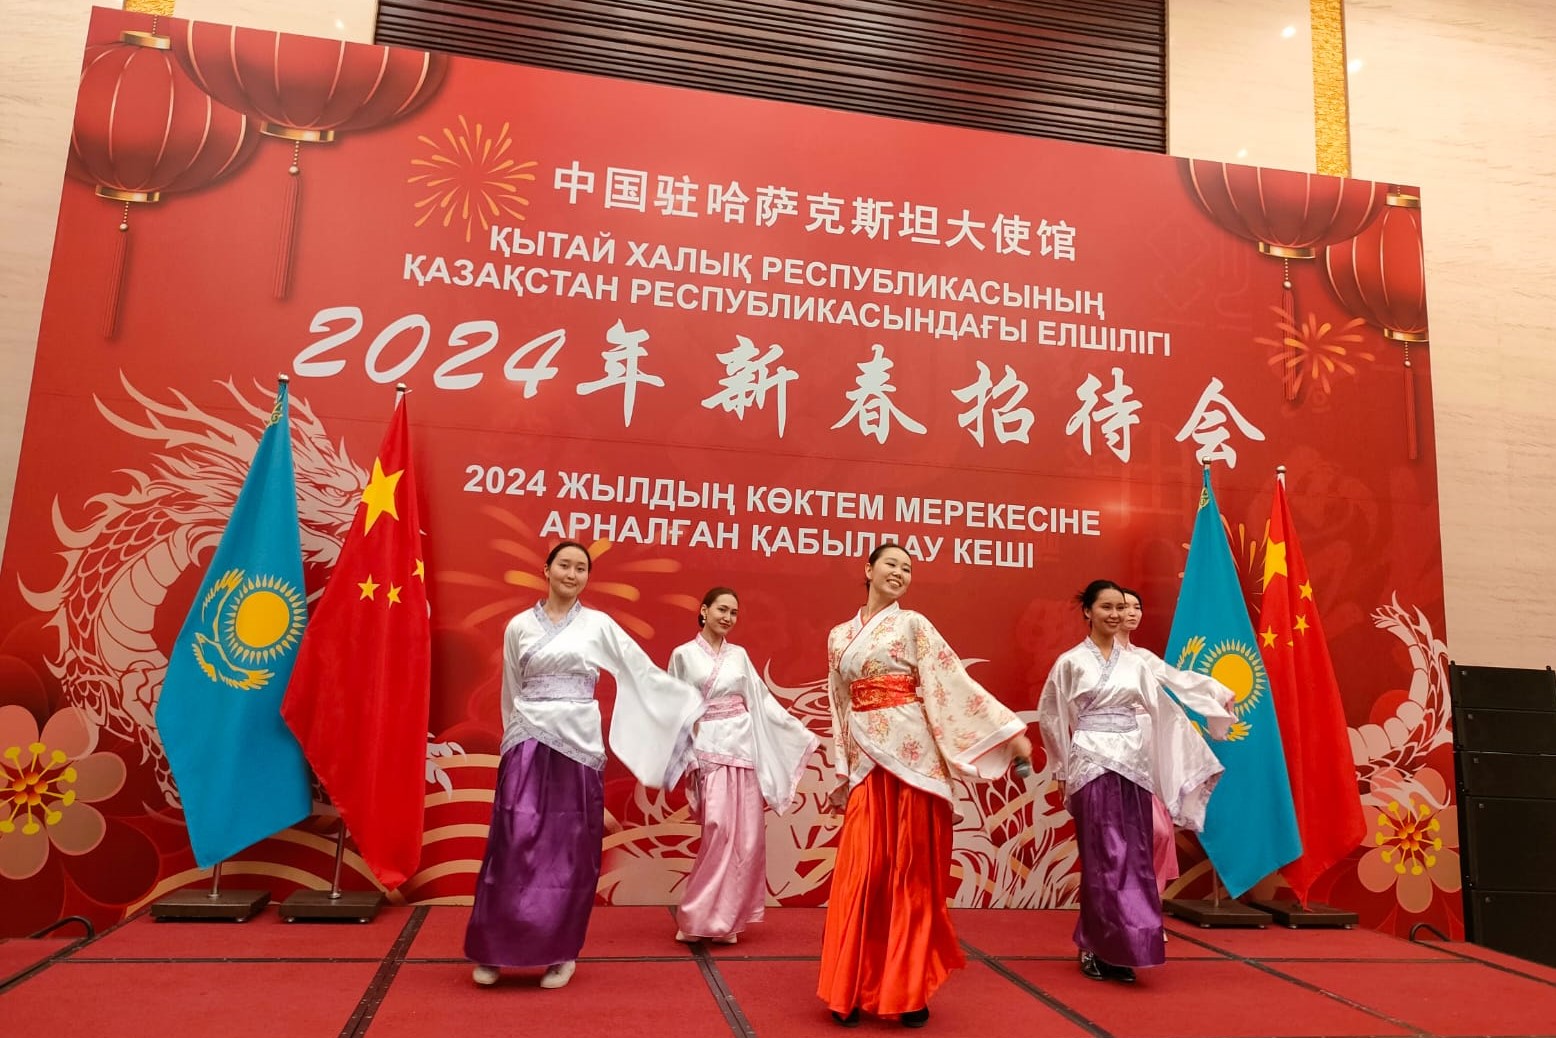 Chinese Embassy in Astana Hosts a Lunar New Year Gala. Source: DKNews